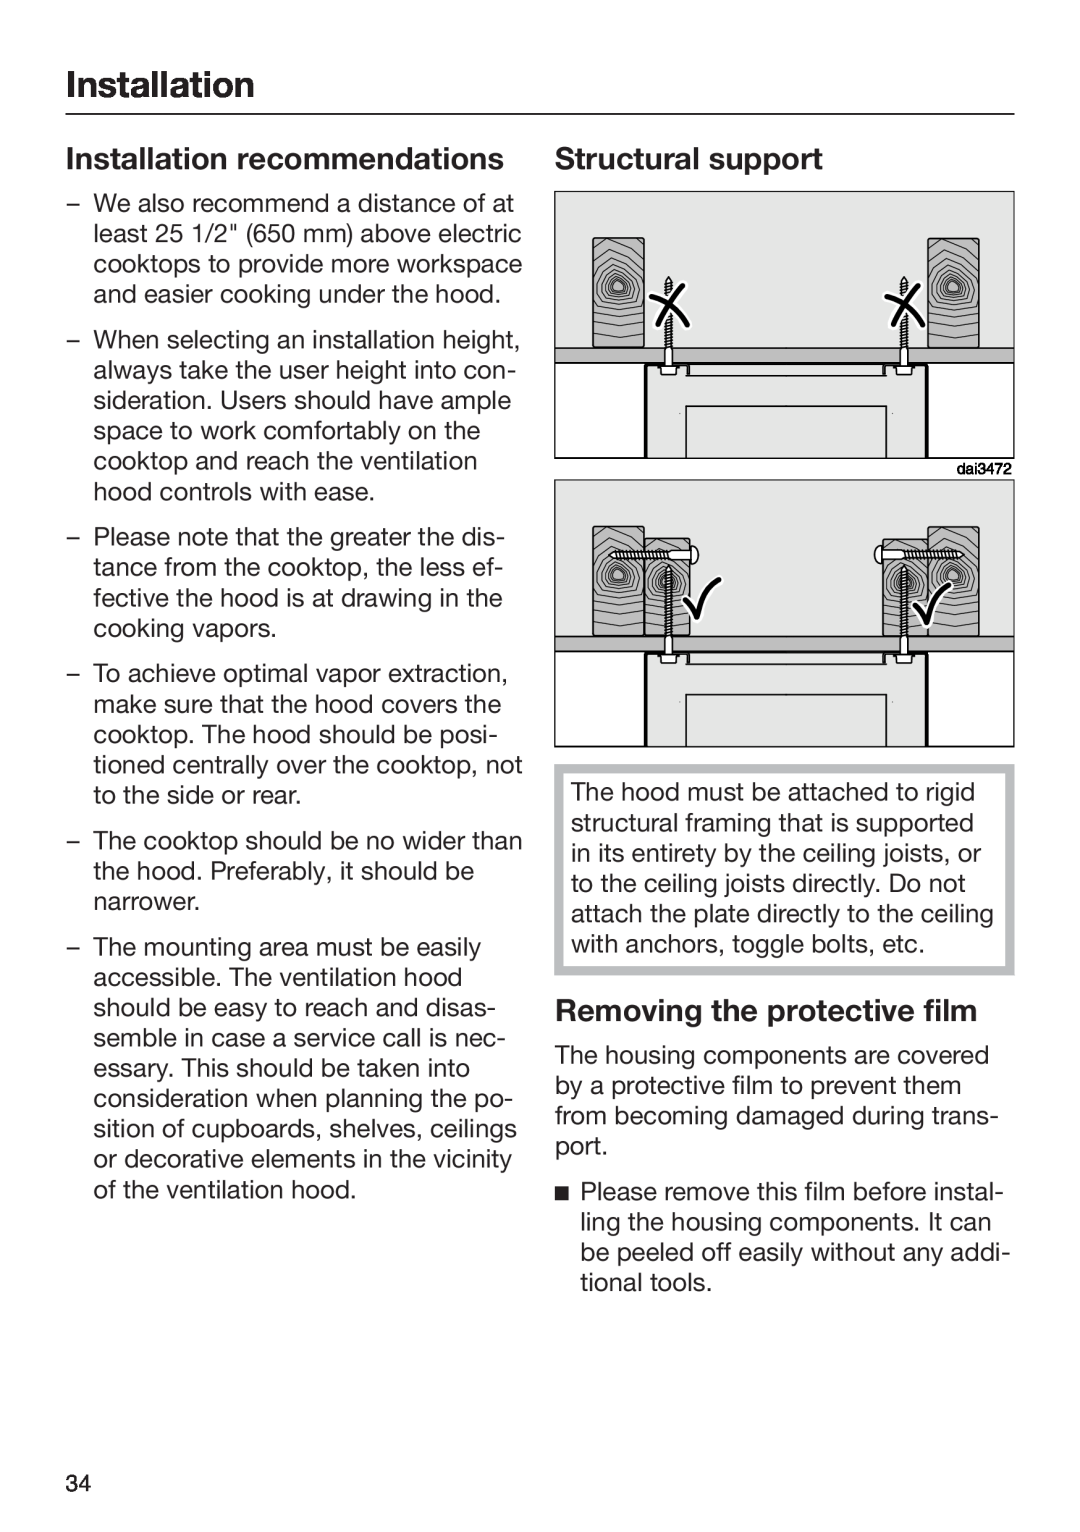 Miele M.-Nr. 09 805 980 Installation recommendations, Structural support, Removing the protective film 